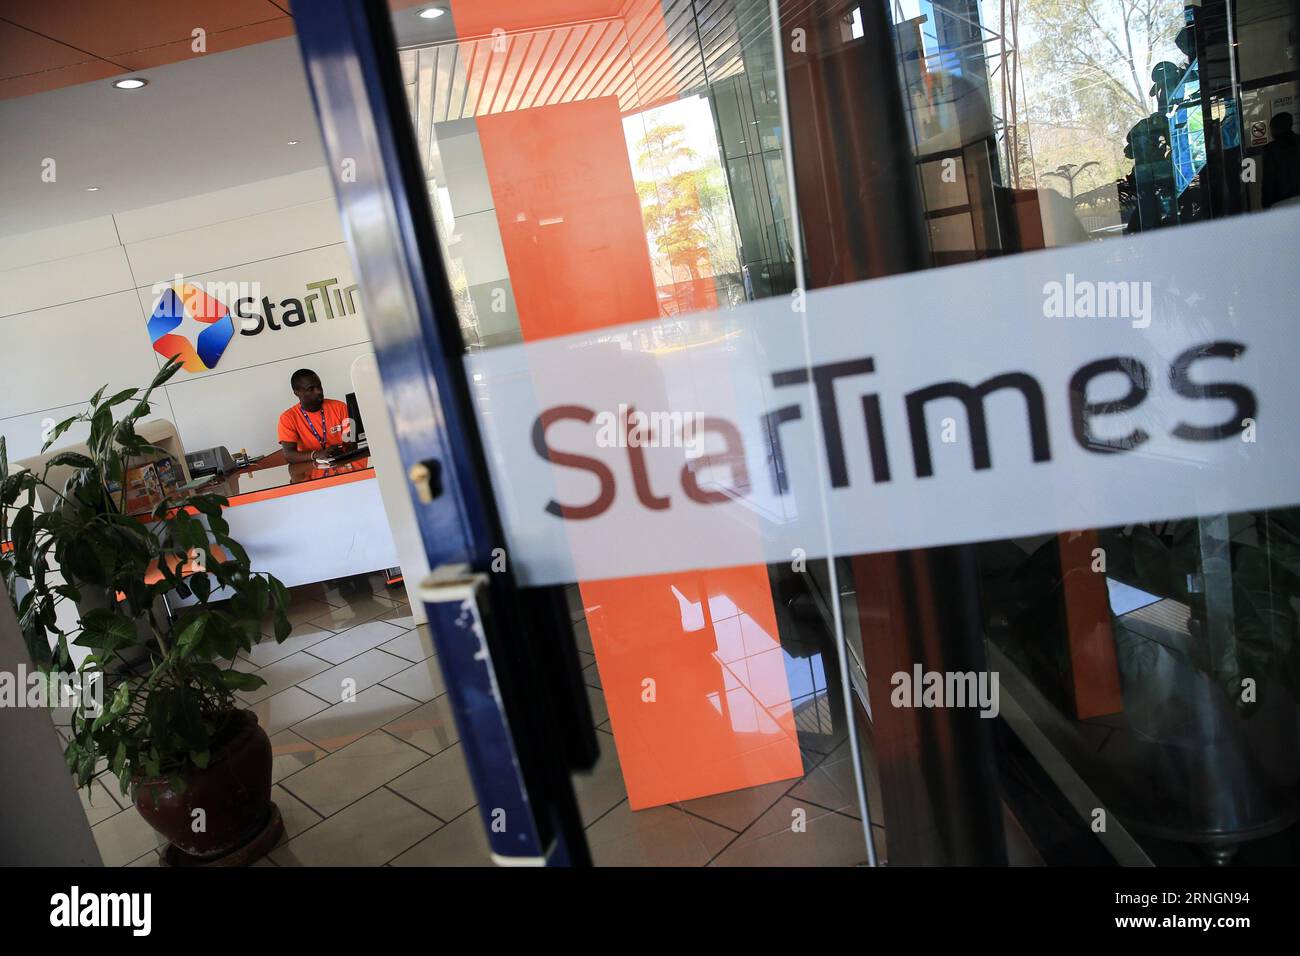 (161007) -- NAIROBI, Oct. 7, 2016 -- A staff member works at Startimes shop in Nairobi, capital of Kenya, on Oct. 7, 2016. StarTimes, a Chinese pay TV provider, operates in 16 African countries with over 8 million African subscribers. )(zcc) KENYA-NAIROBI-STARTIMES-TV SERVICE PanxSiwei PUBLICATIONxNOTxINxCHN   Nairobi OCT 7 2016 a Staff member Works AT  Shop in Nairobi Capital of Kenya ON OCT 7 2016  a Chinese Pay TV Provider operates in 16 African Countries With Over 8 Million African subscribers ZCC Kenya Nairobi  TV Service PanxSiwei PUBLICATIONxNOTxINxCHN Stock Photo